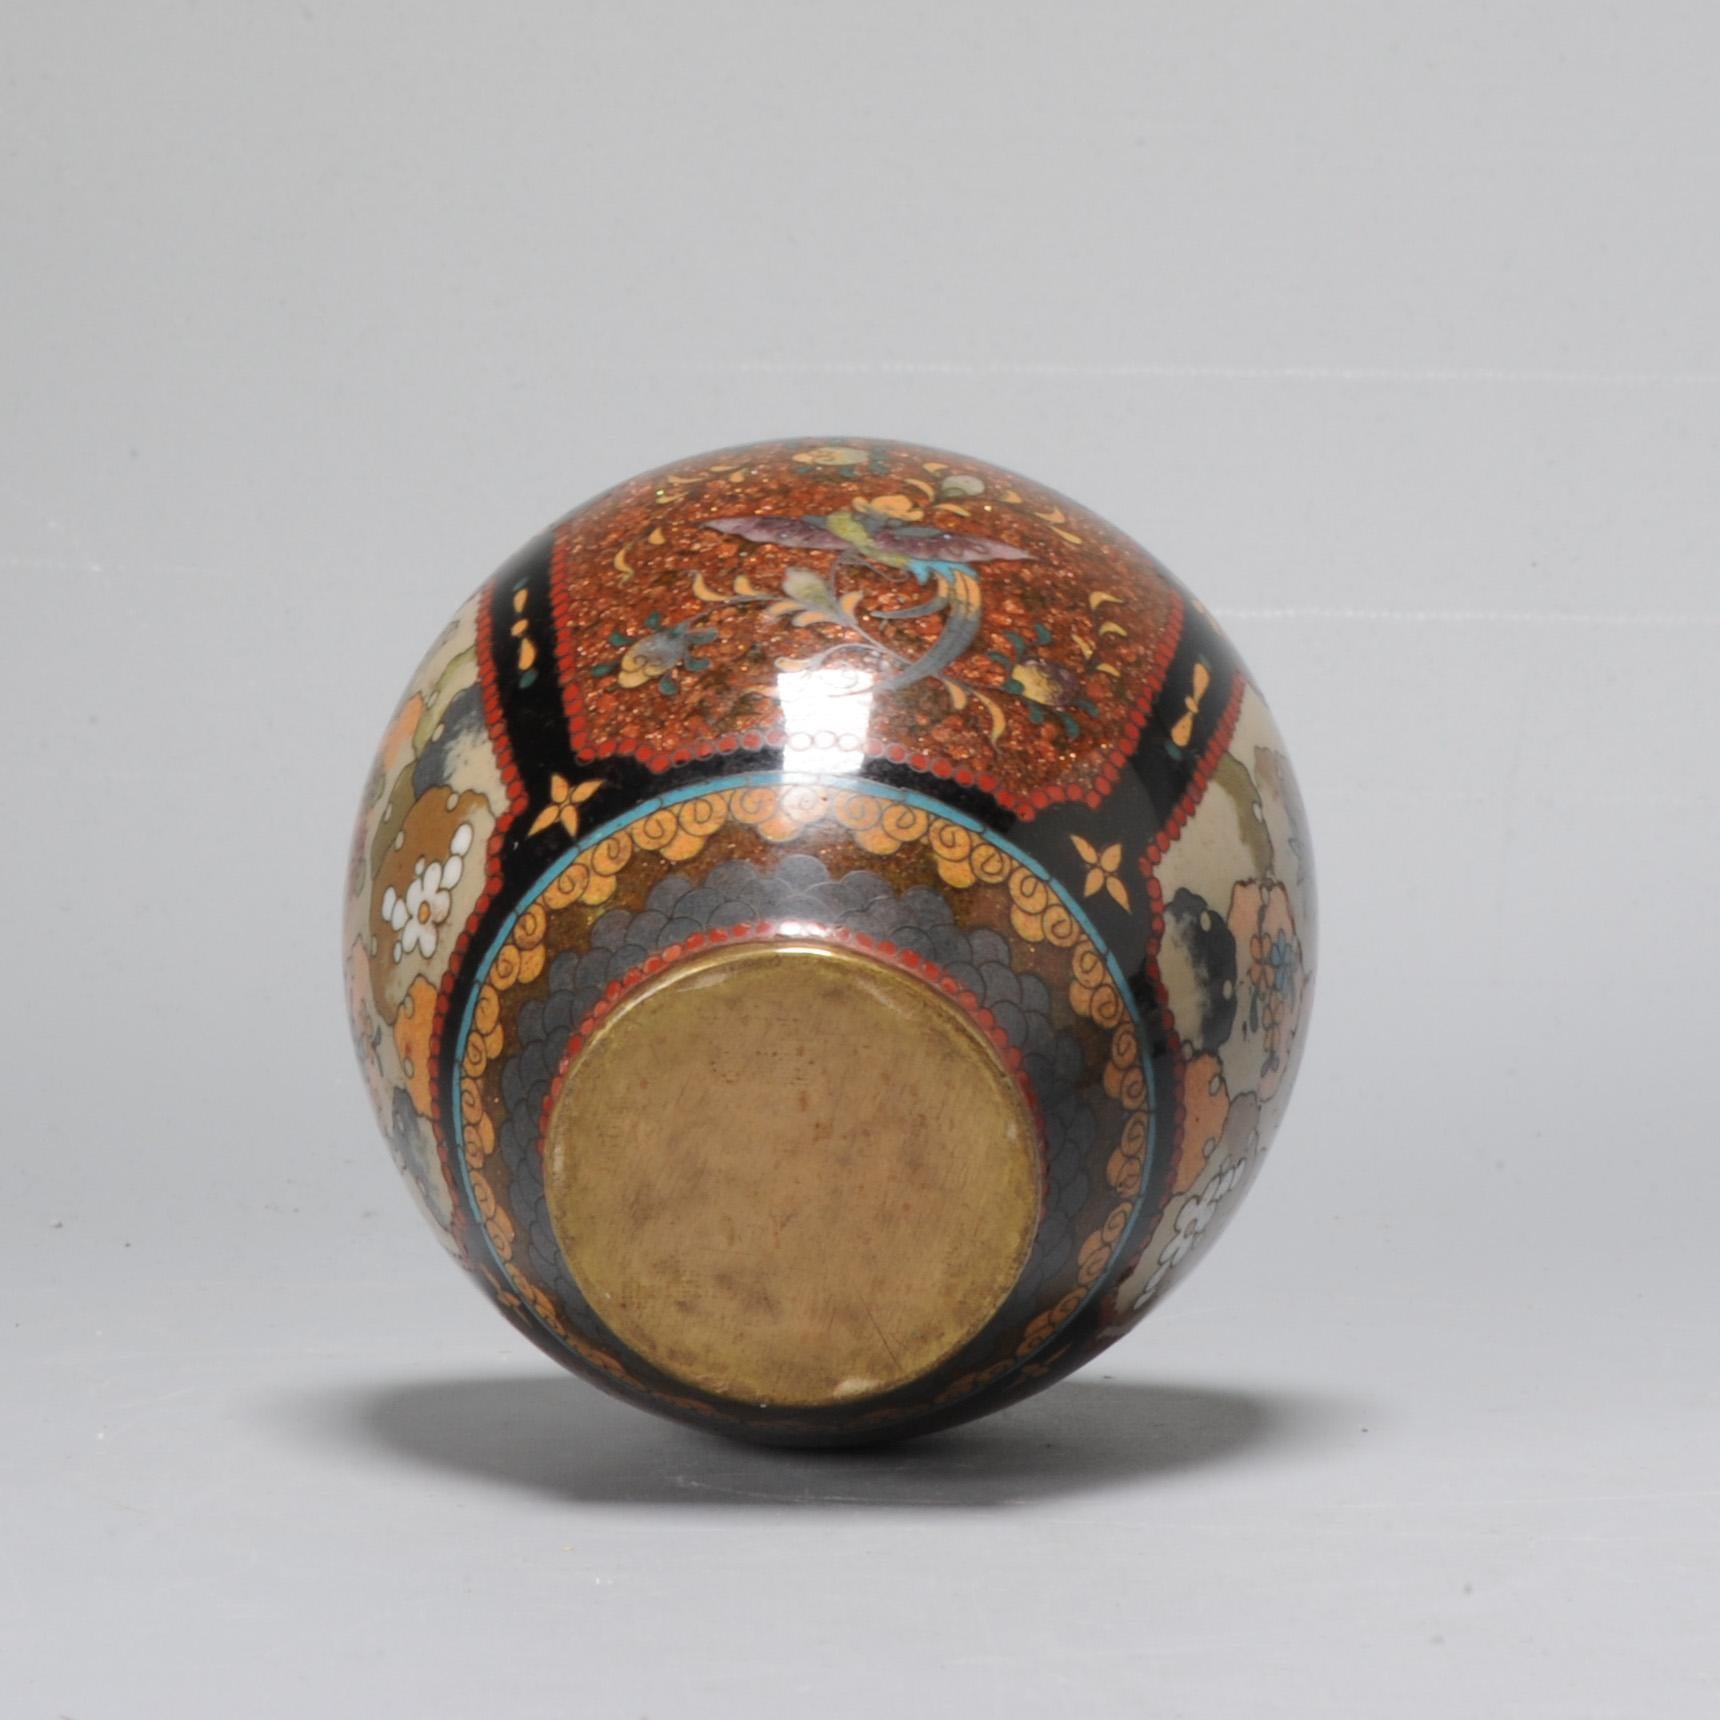 A Small Vase with Incense Brown Cloisonné Enamel Meiji Era, 1868-1912 In Good Condition For Sale In Amsterdam, Noord Holland